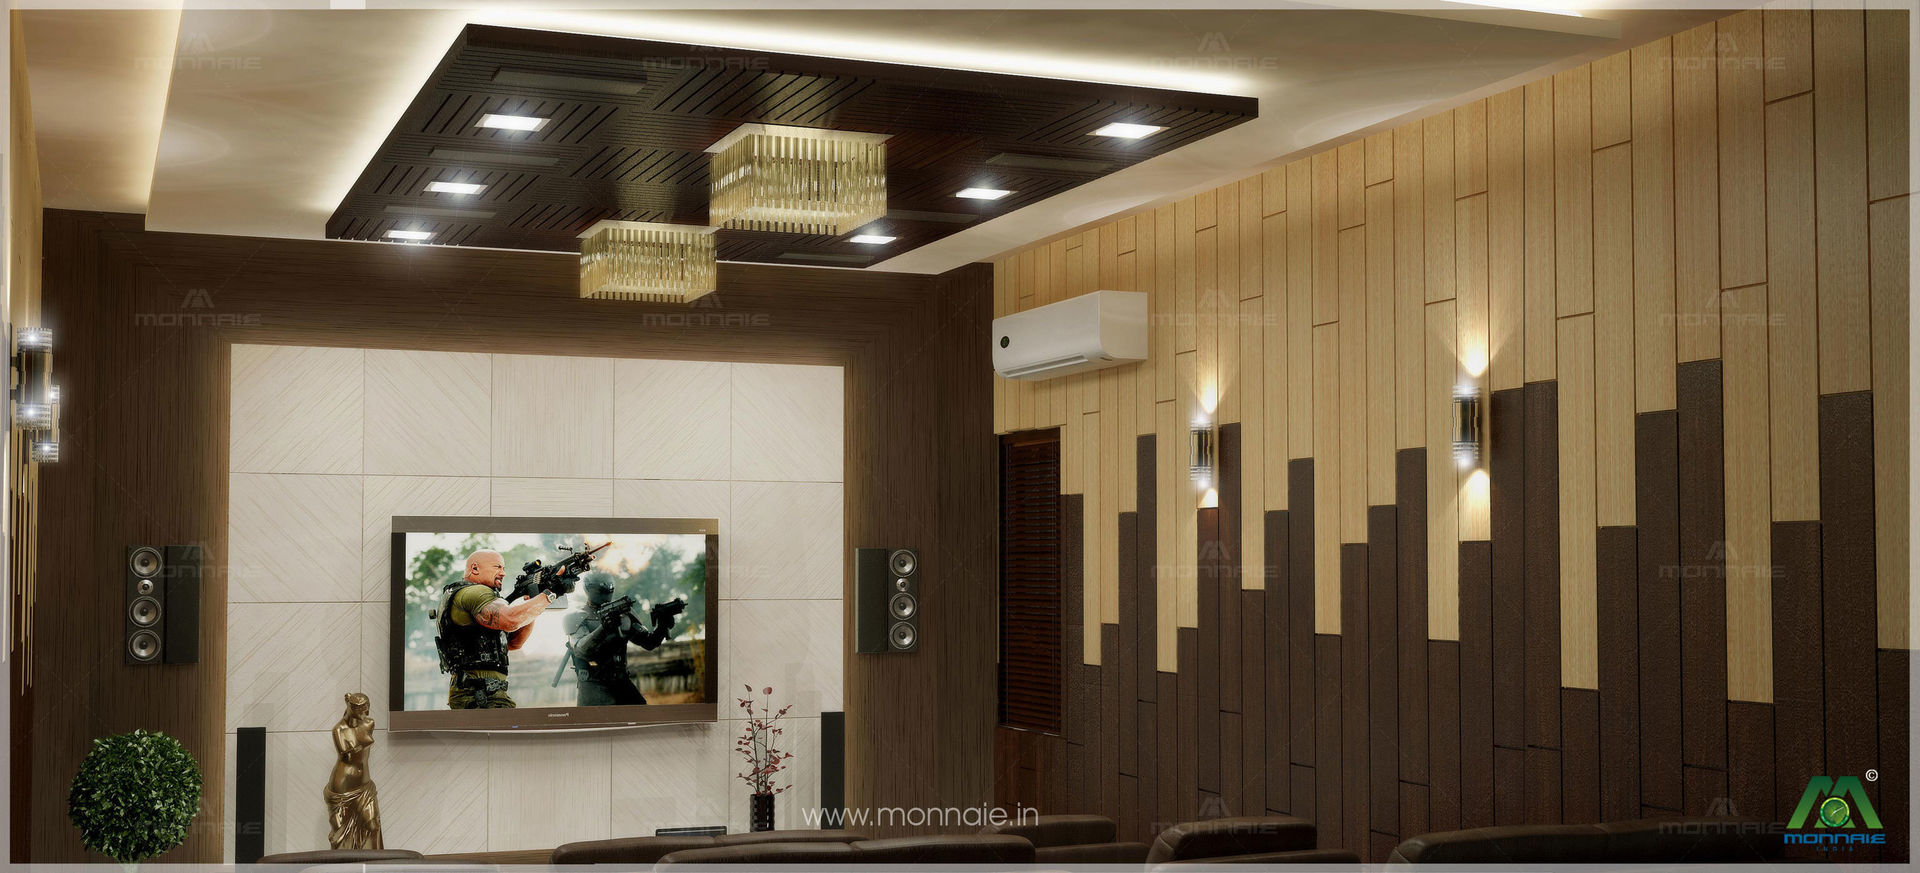 Home theatre Monnaie Interiors Pvt Ltd Modern media room Property,Interior design,Building,Lighting,Architecture,Wall,Art,Ceiling,Glass,Event